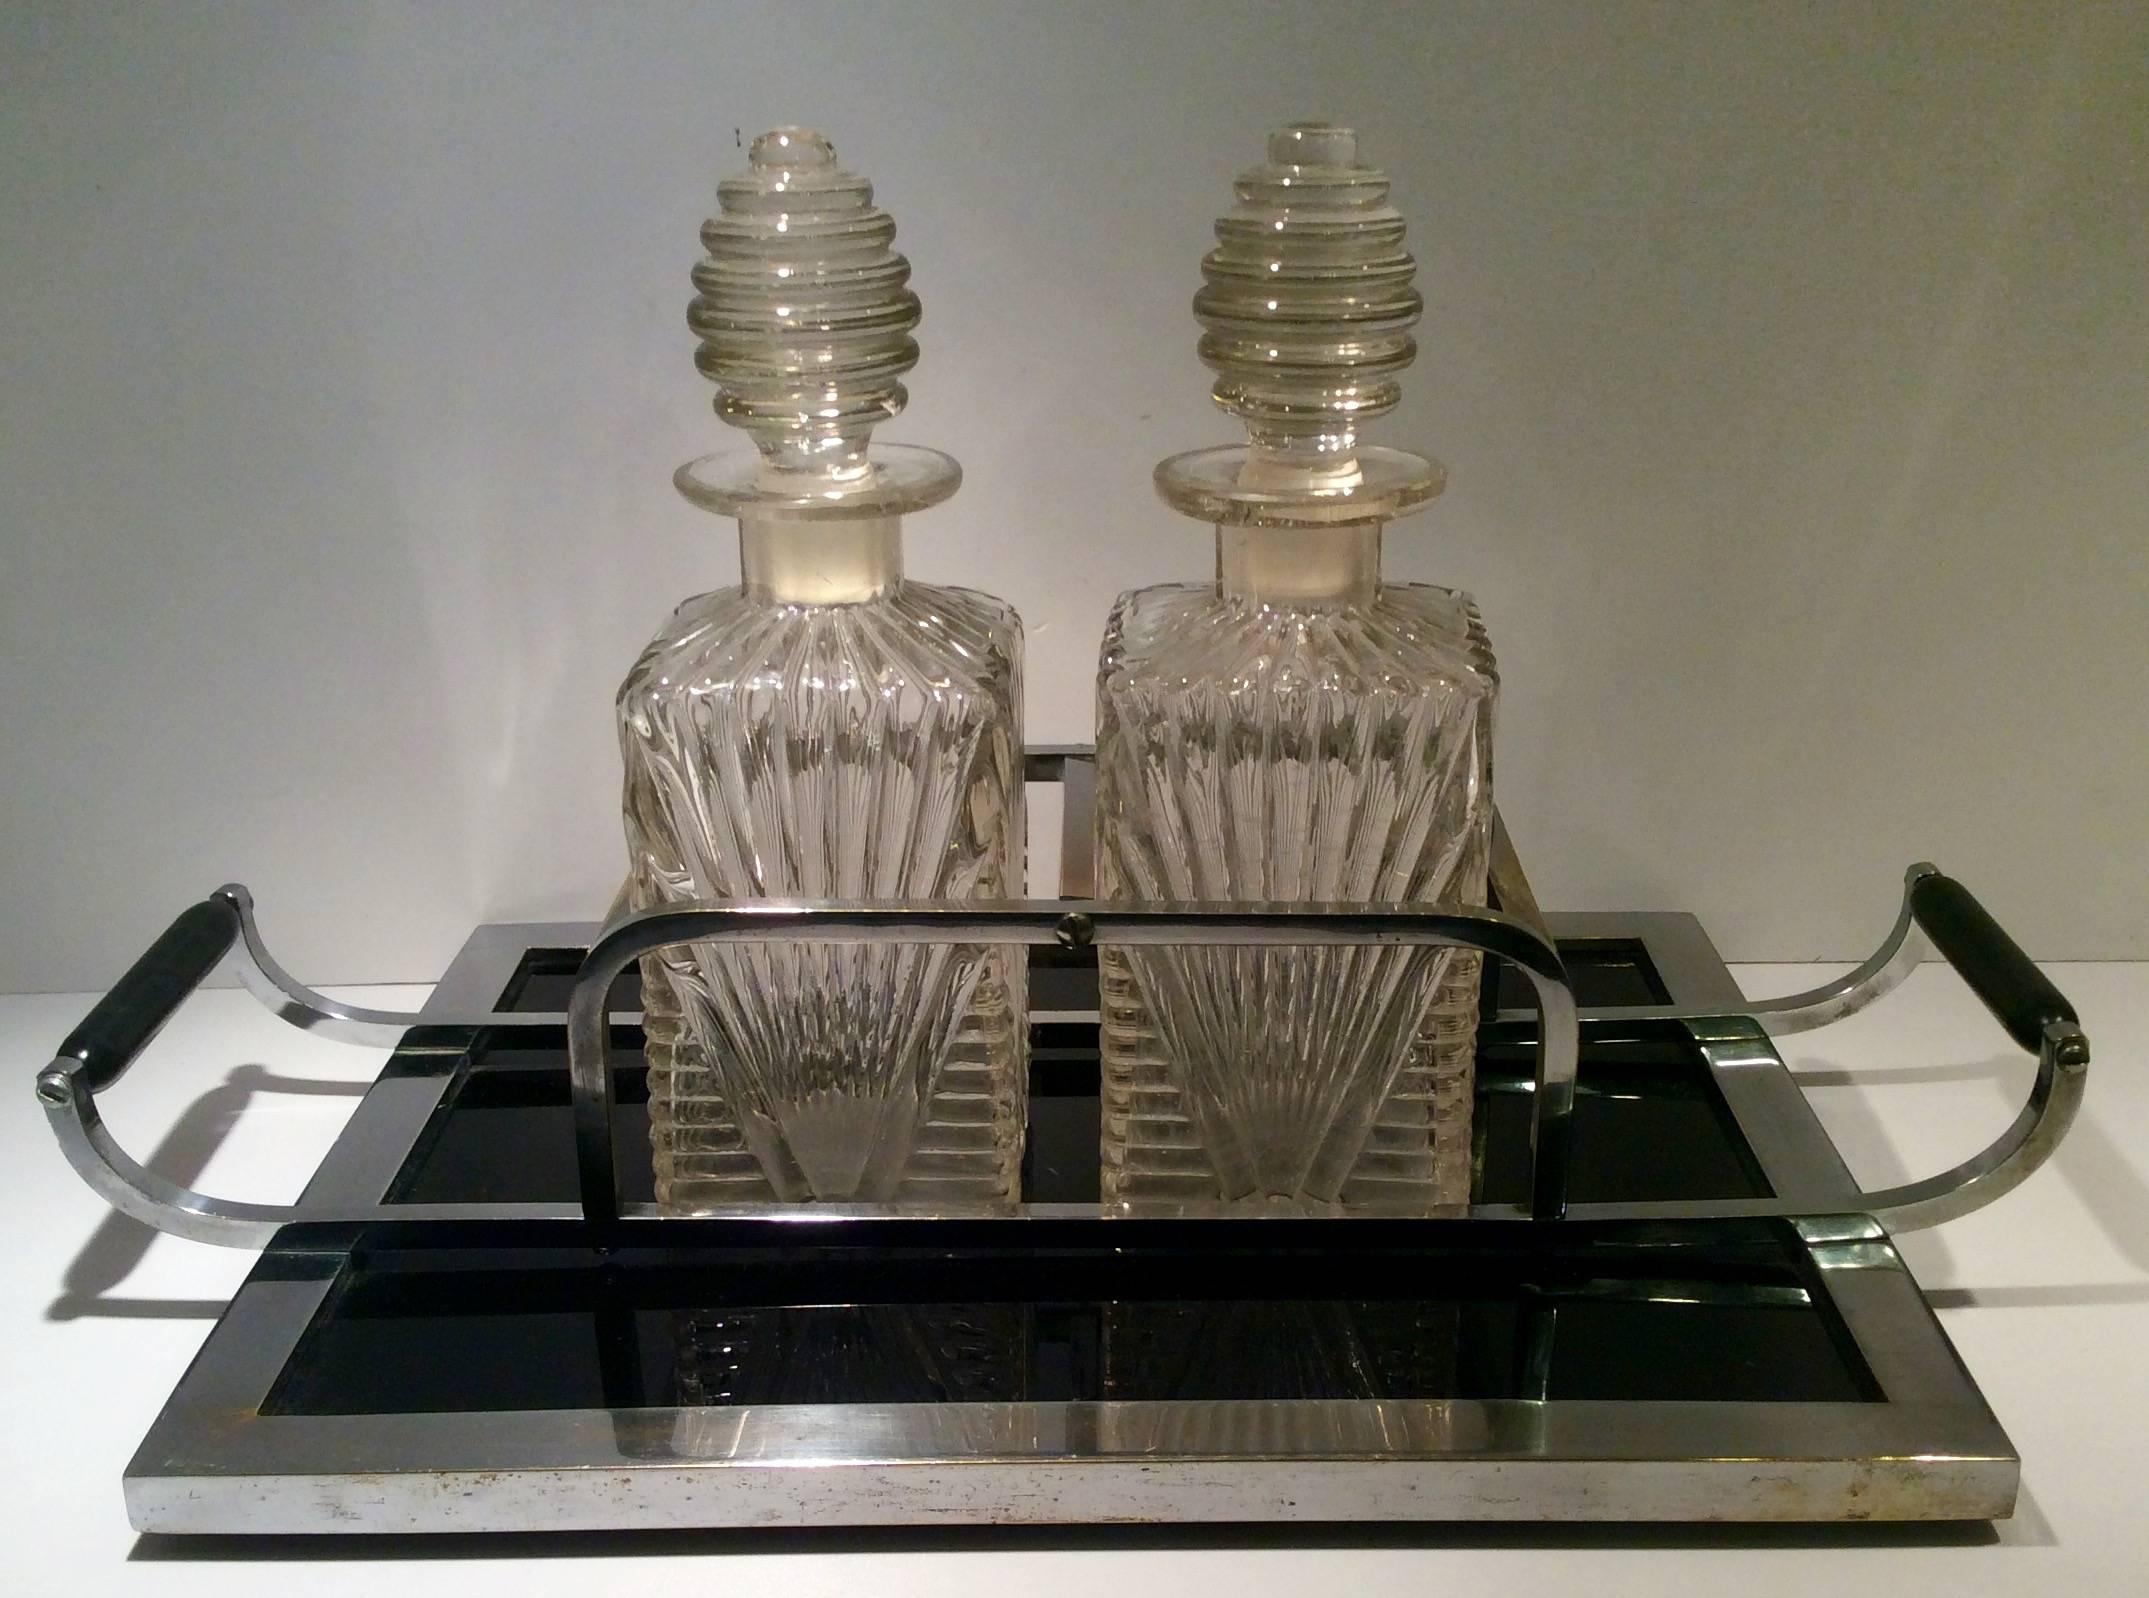 Art Deco tantalus, stunning pair of Art Deco decanters on a fitted chrome tray with black bakelite base and handles.
The tray is 46 cm across at the handles.
The tray base is 37 cm W, 28 cm D and 2 cm thick.
Each decanter is 25 cm H, 9 cm W, 9 cm